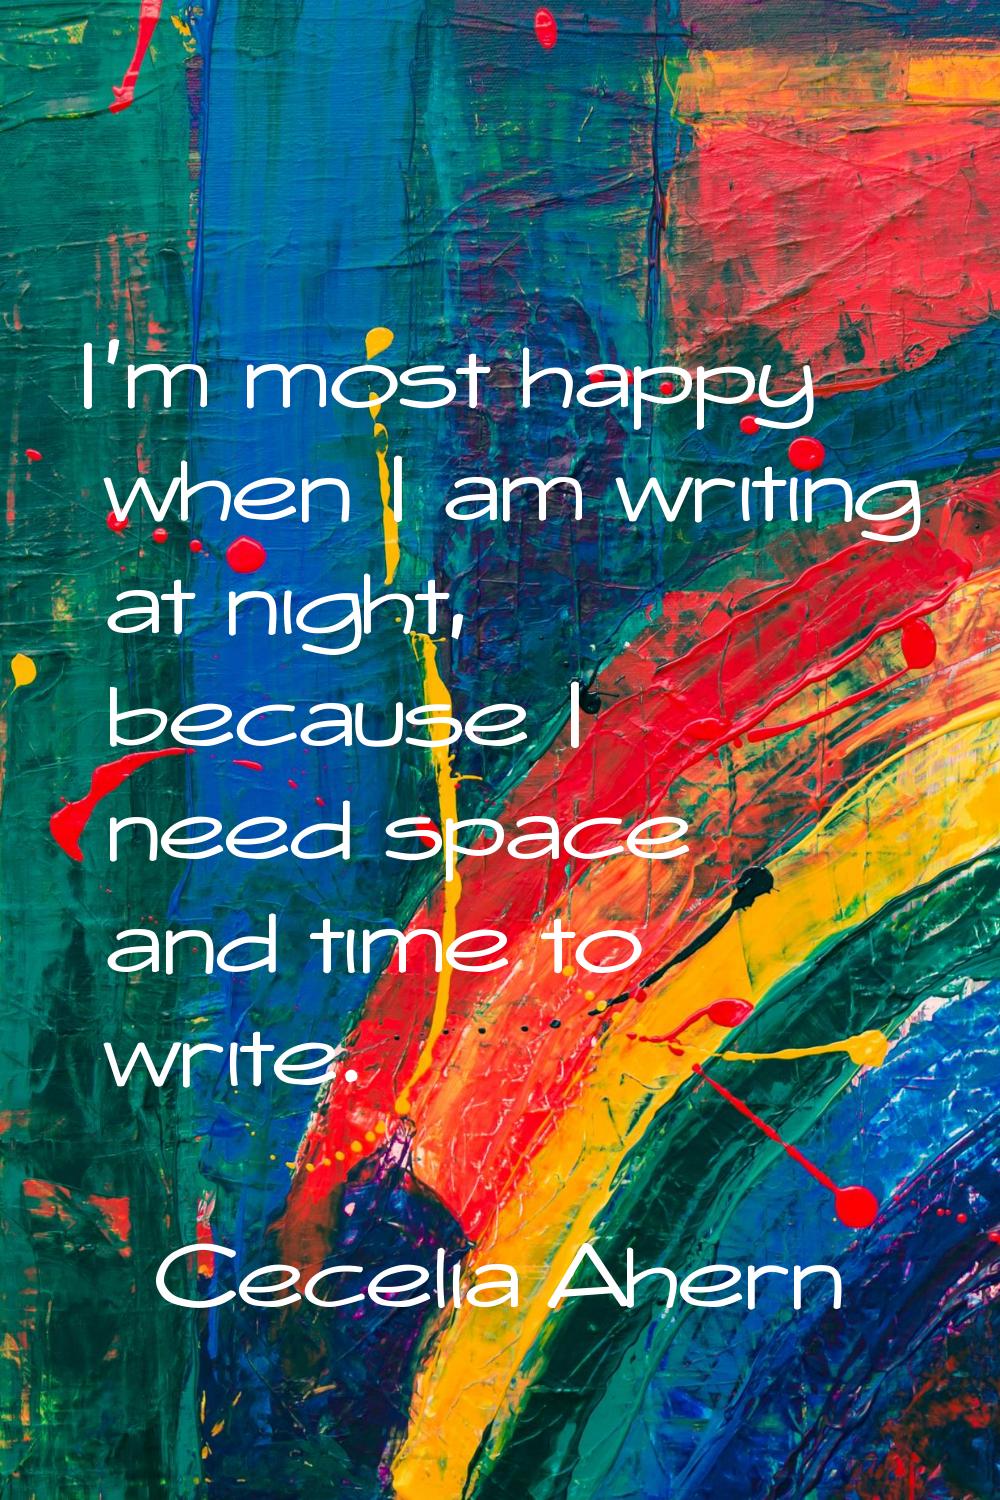 I'm most happy when I am writing at night, because I need space and time to write.